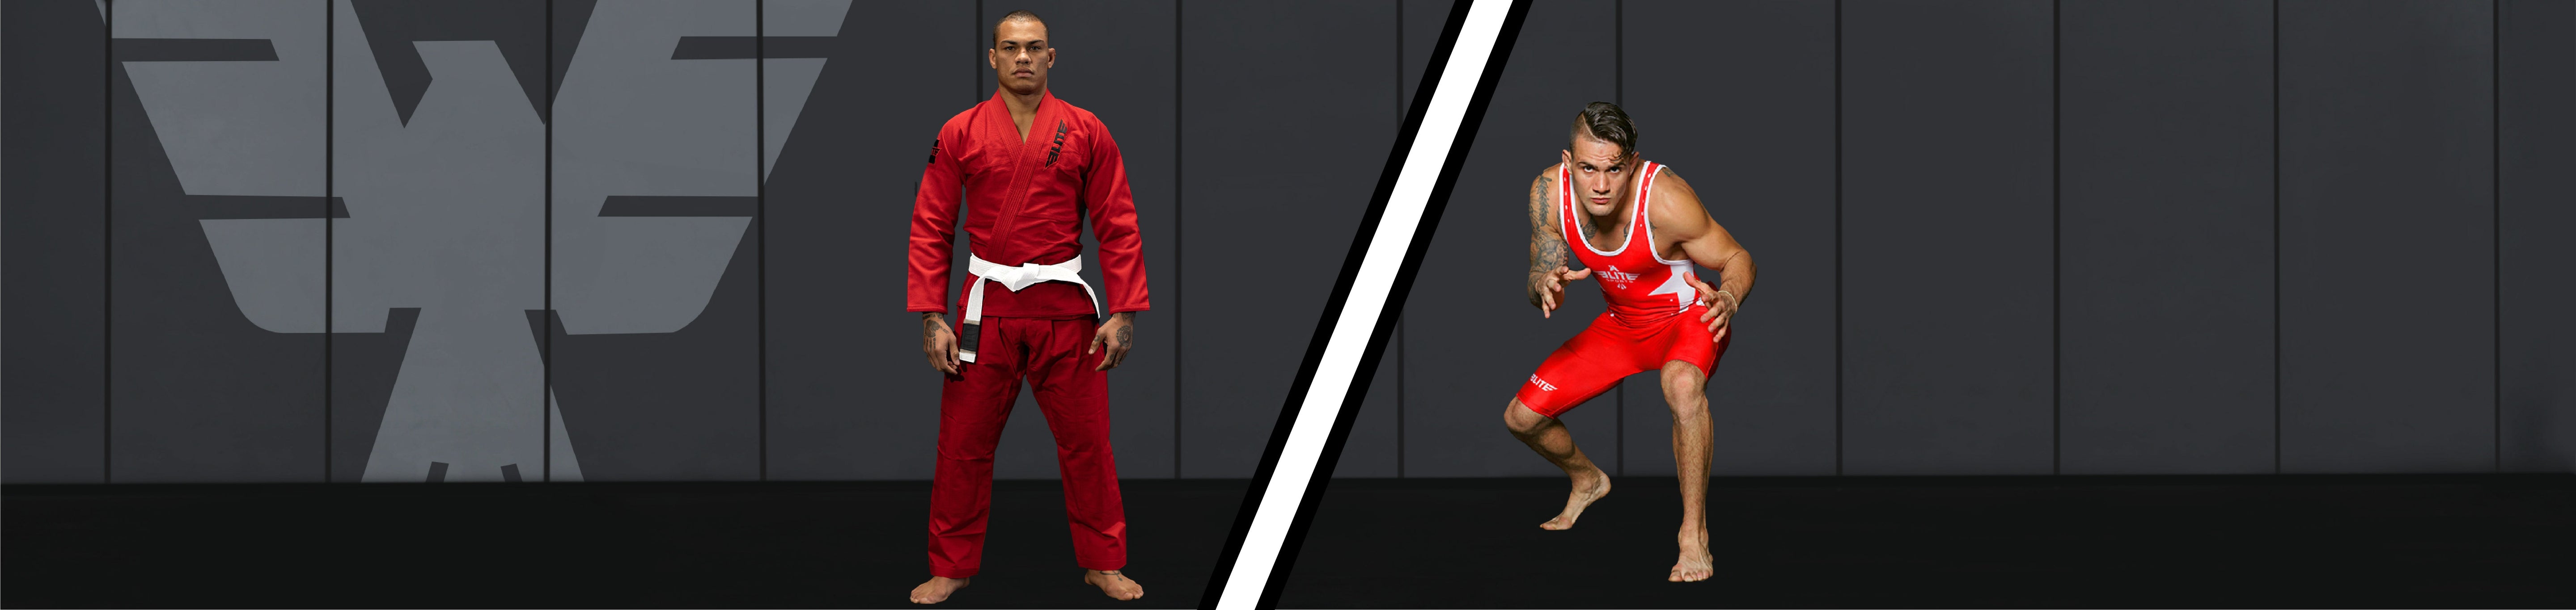 BJJ VS Wrestling: Which one is a more effective fighting style?